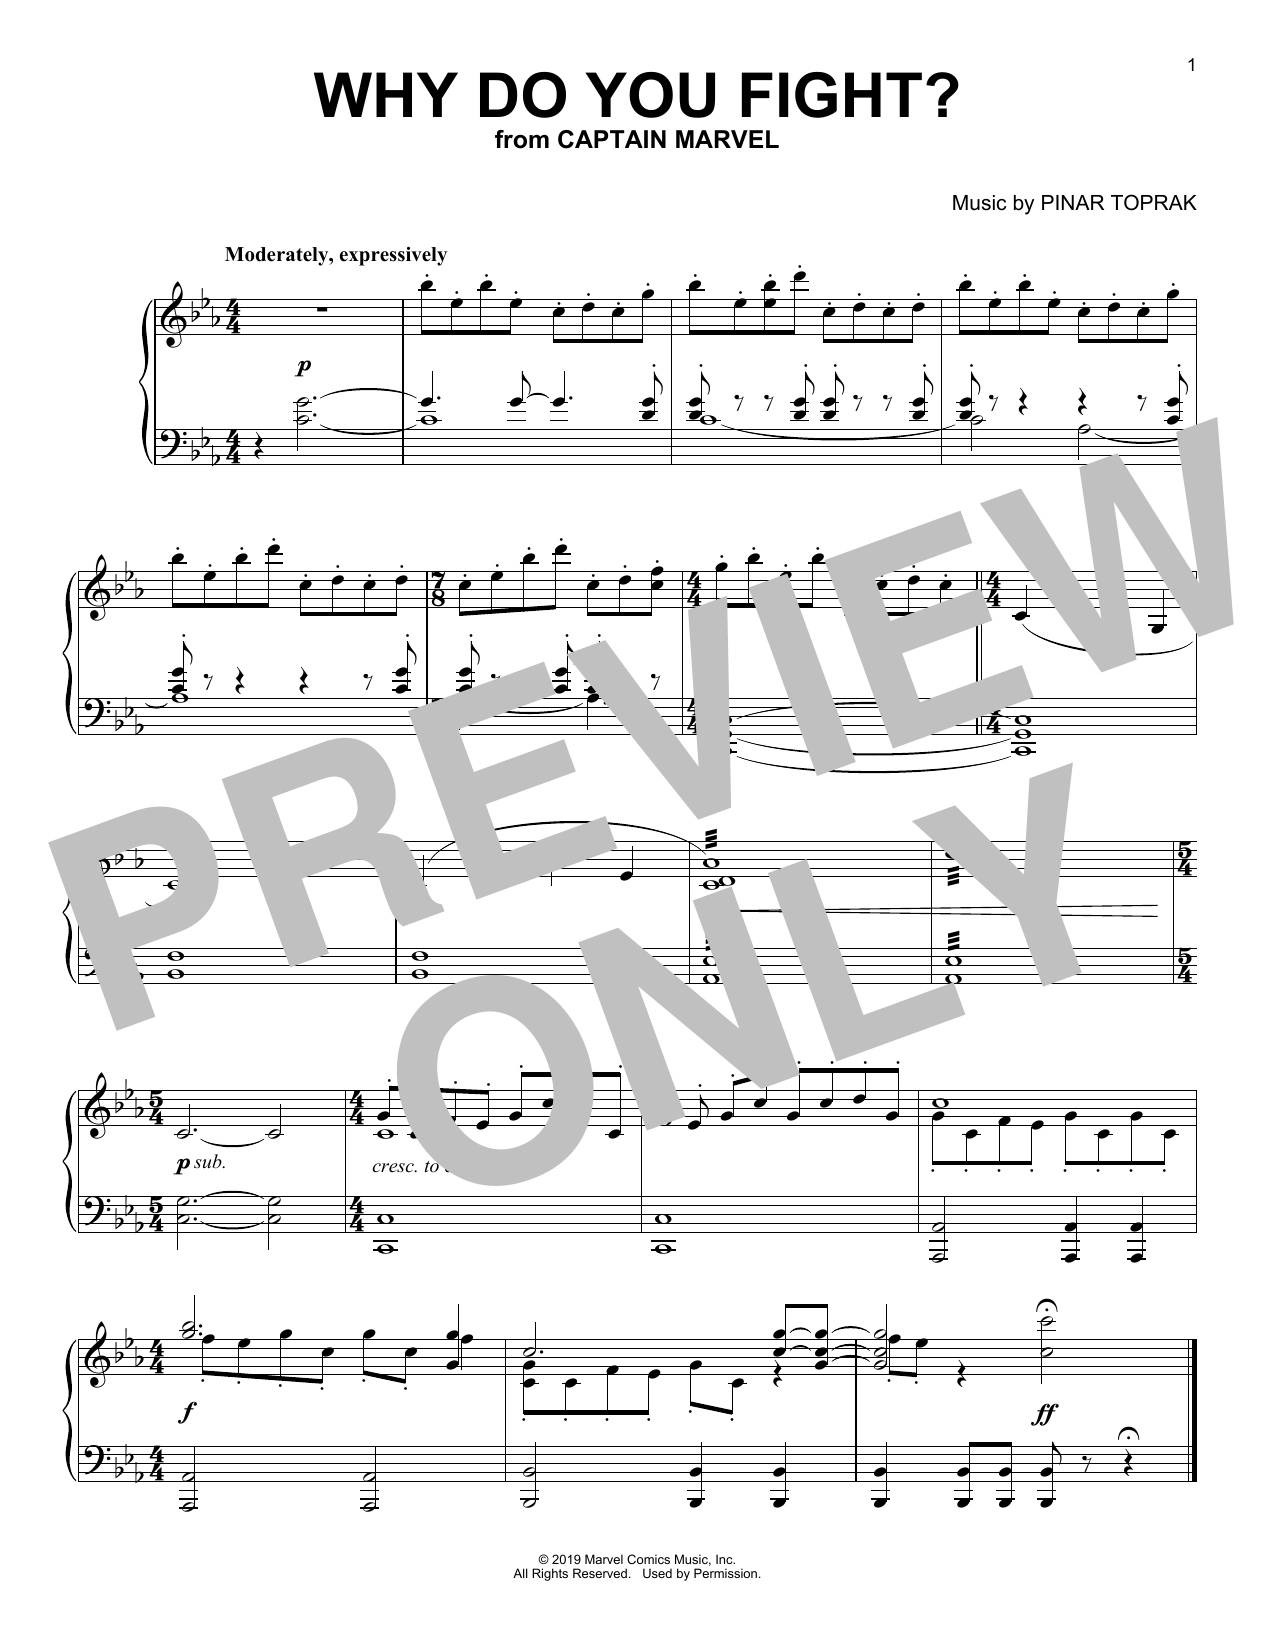 Download Pinar Toprak Why Do You Fight? (from Captain Marvel) Sheet Music